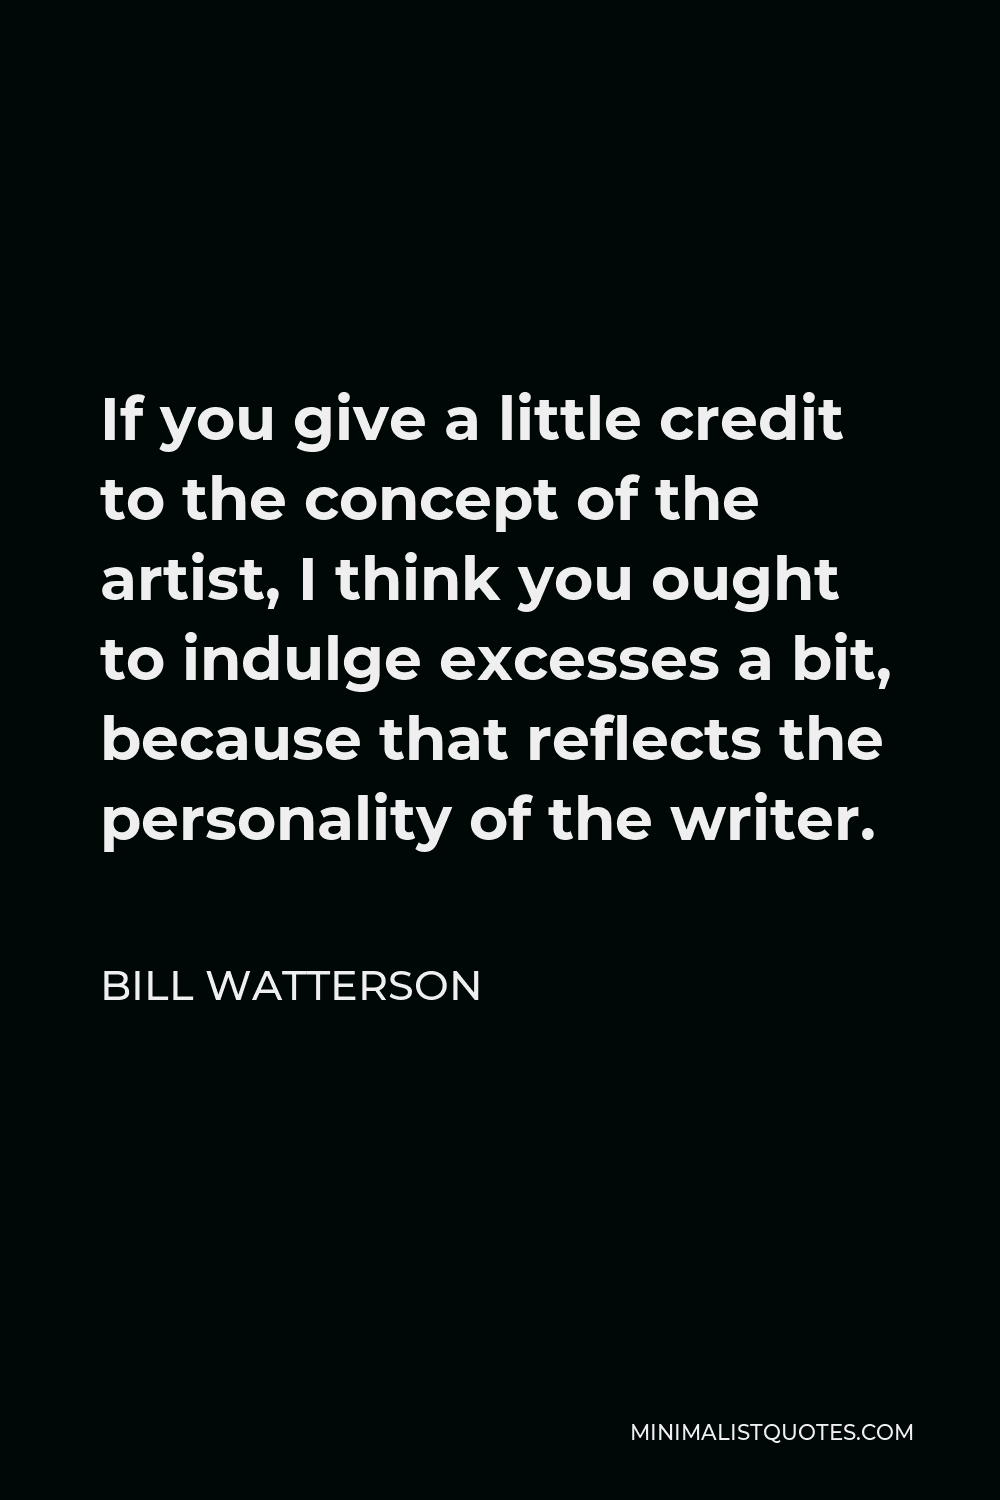 Bill Watterson Quote - If you give a little credit to the concept of the artist, I think you ought to indulge excesses a bit, because that reflects the personality of the writer.